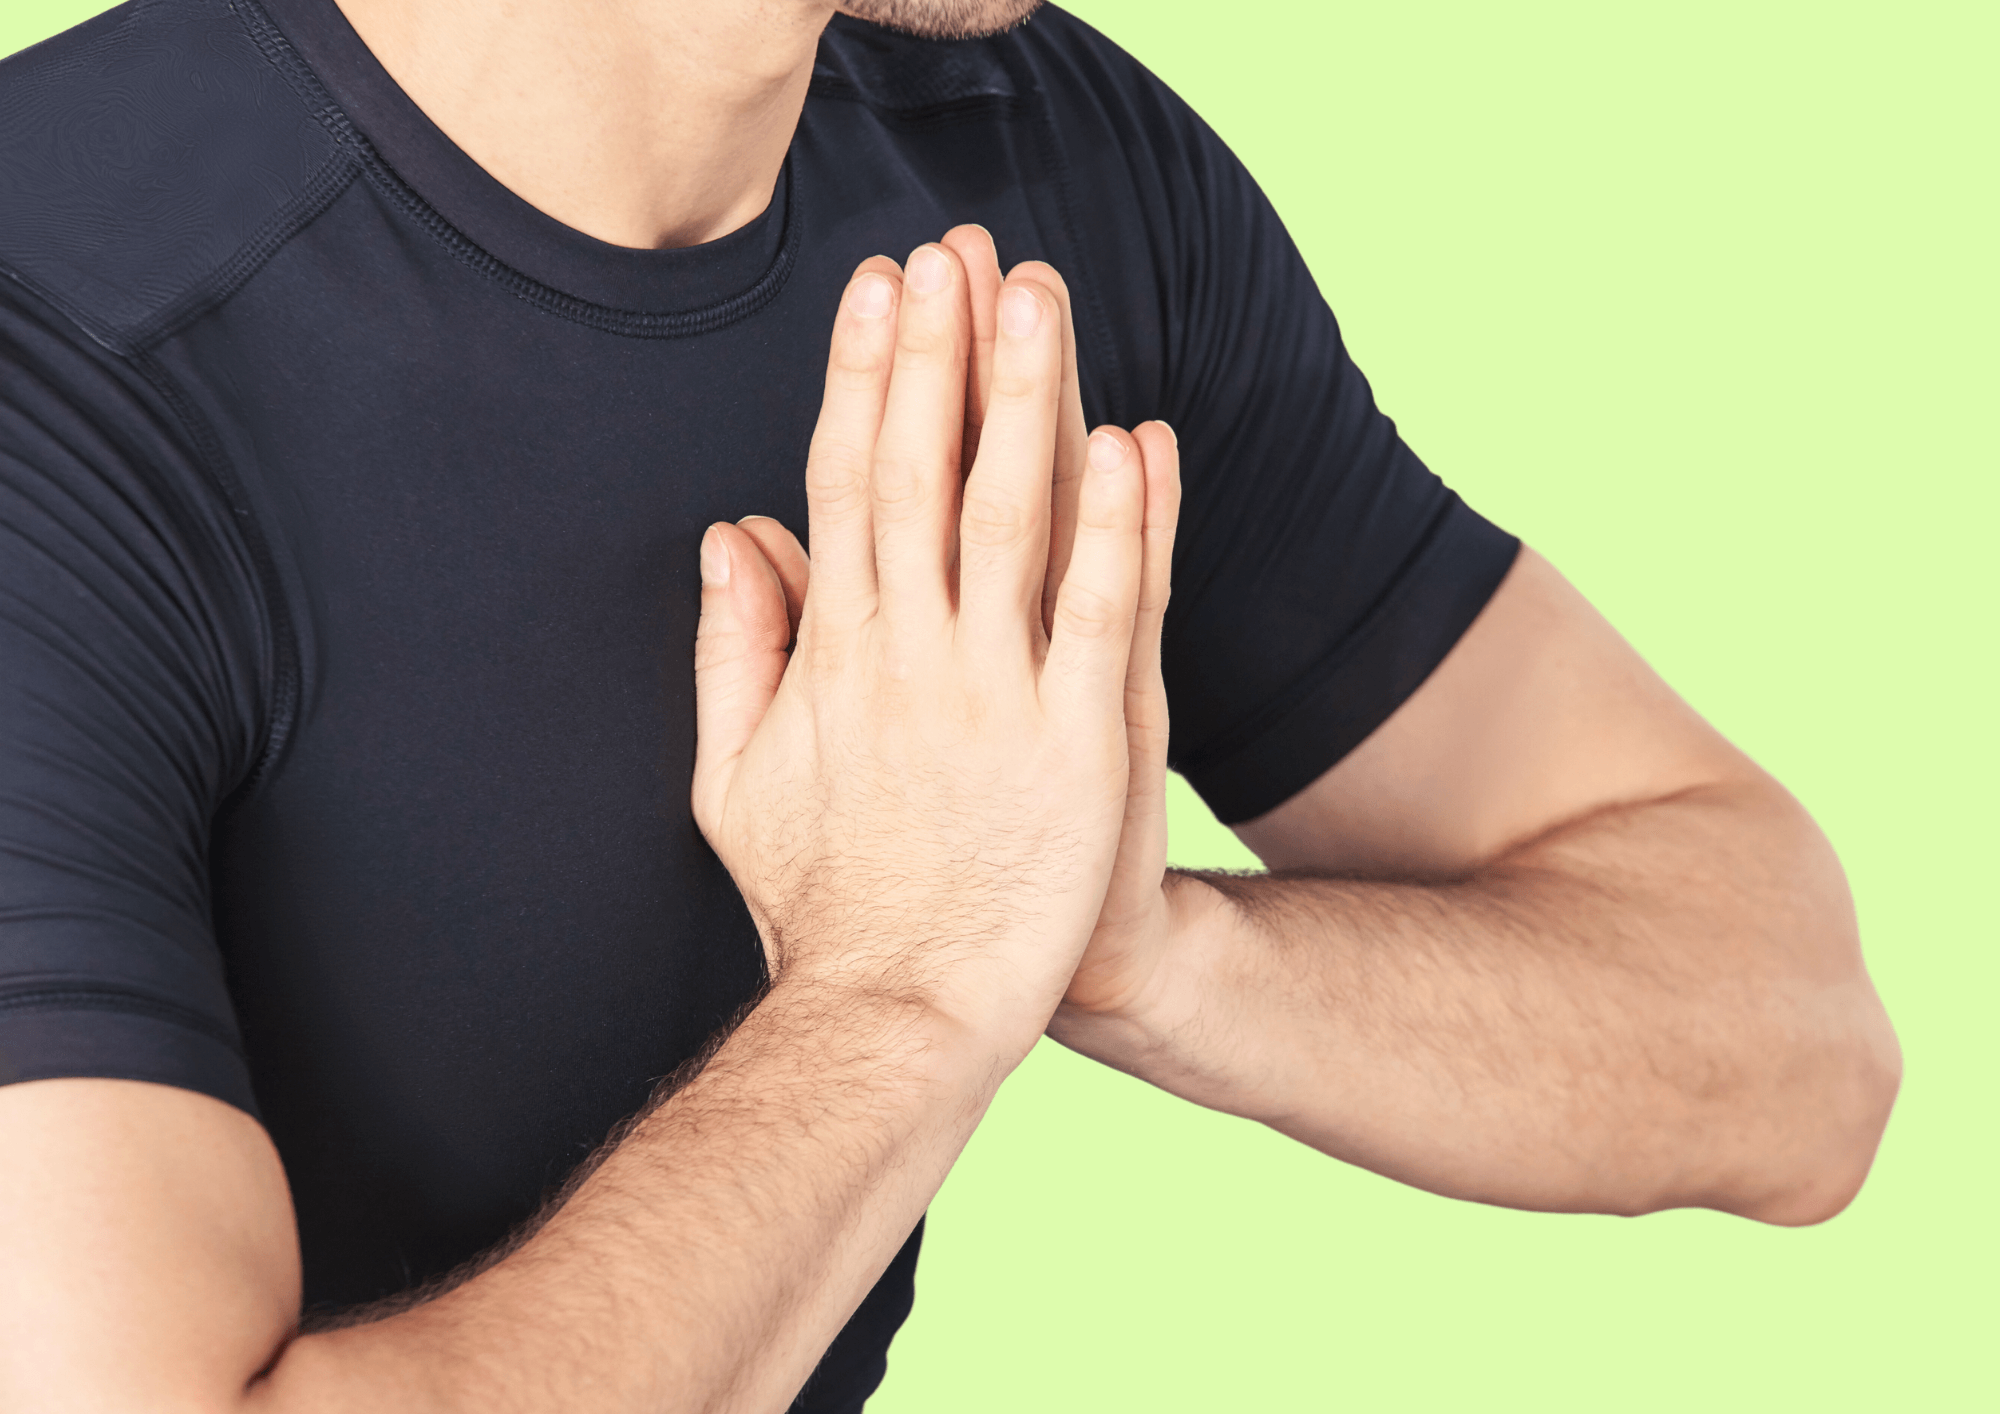 Man is holding his hands together in a praying pose.